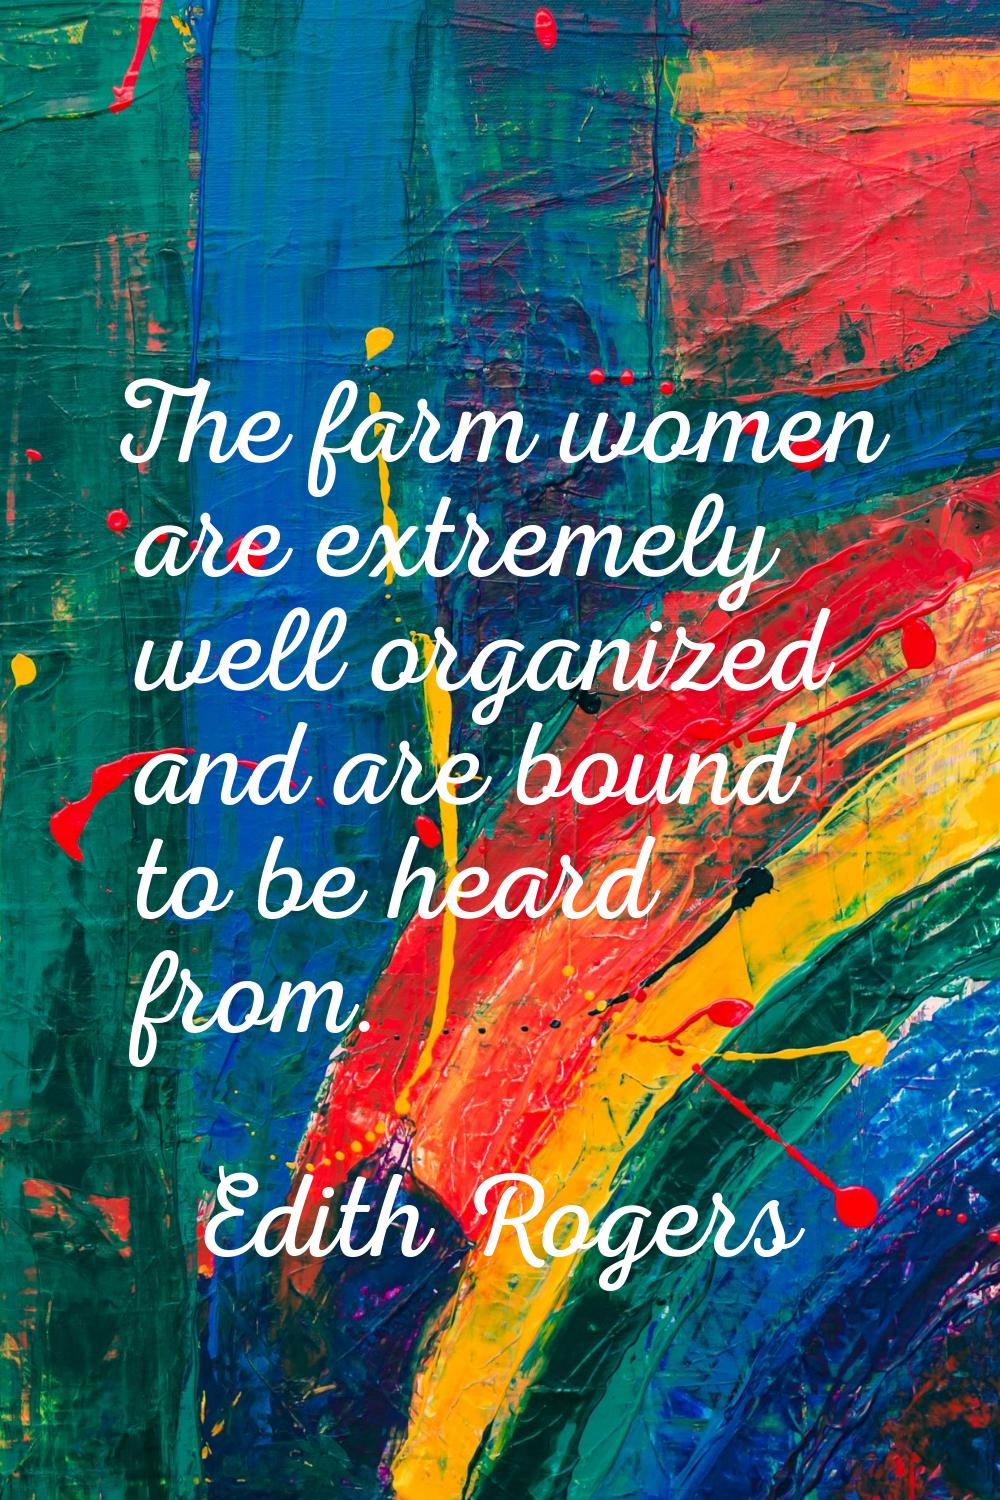 The farm women are extremely well organized and are bound to be heard from.